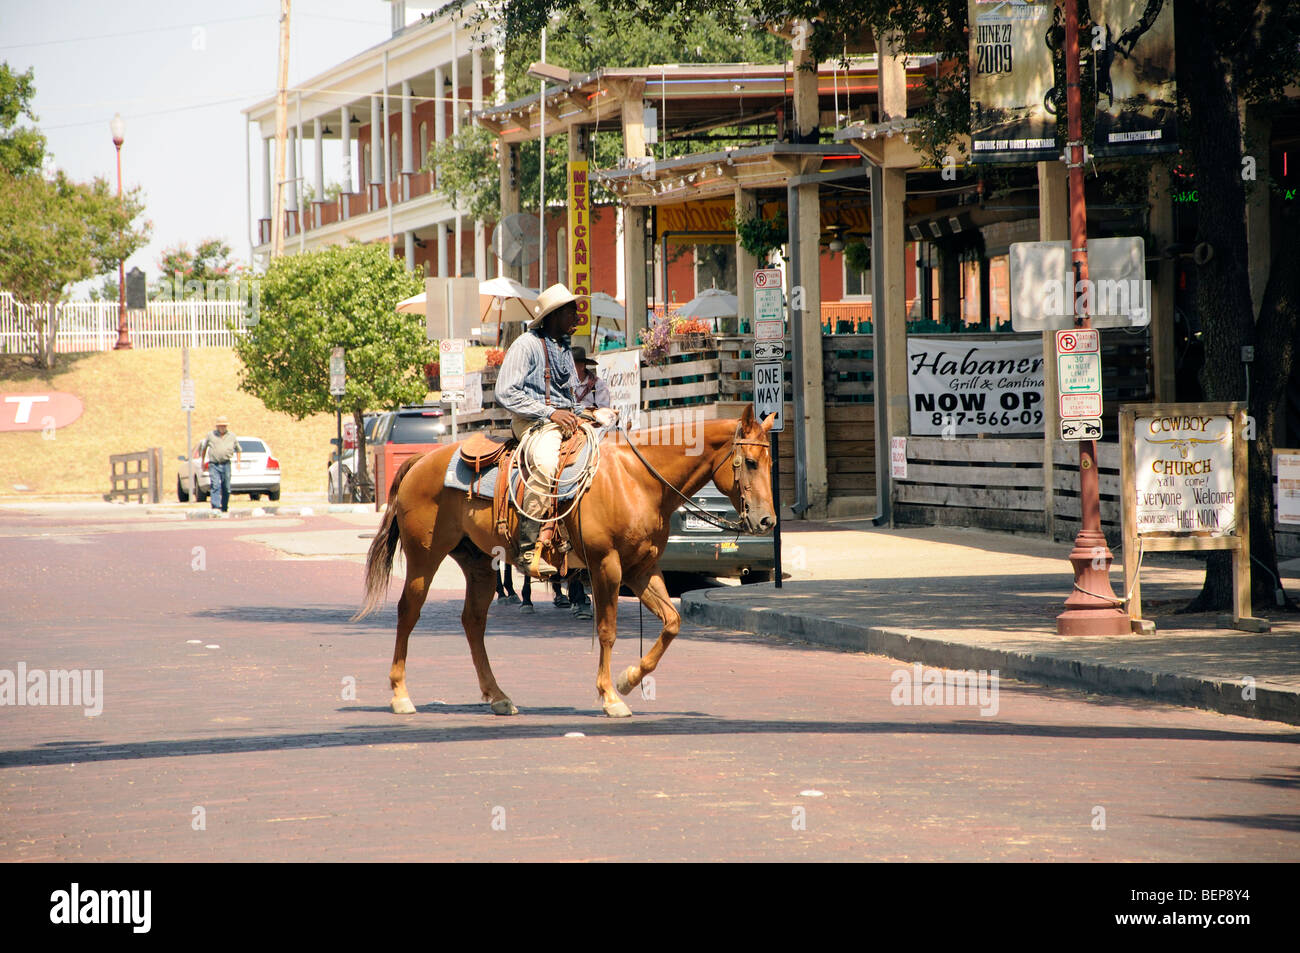 Cowboy At The Stockyards